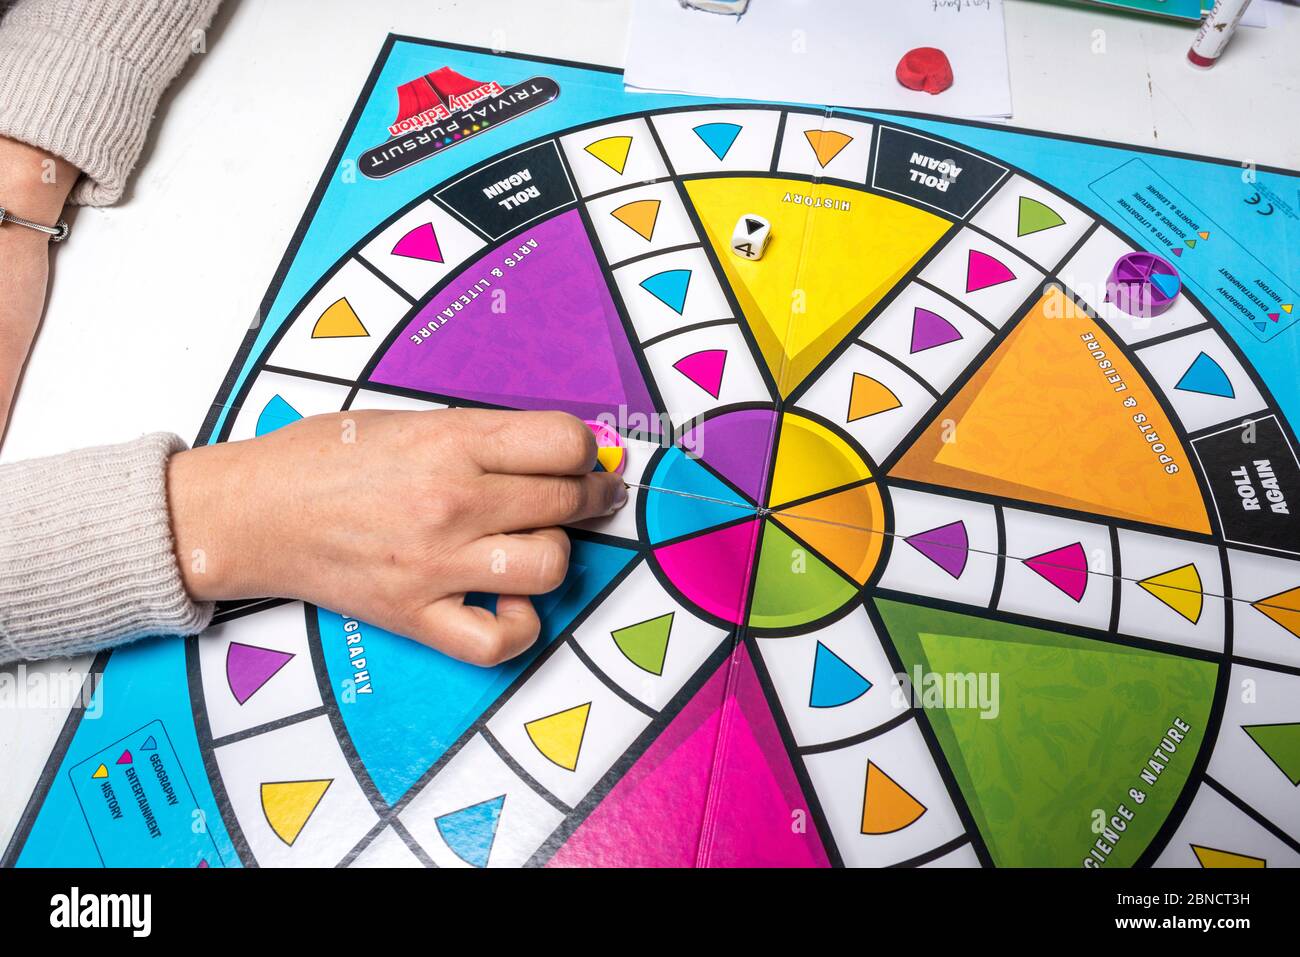 Playing  Trivial Pursuit  board game Stock Photo